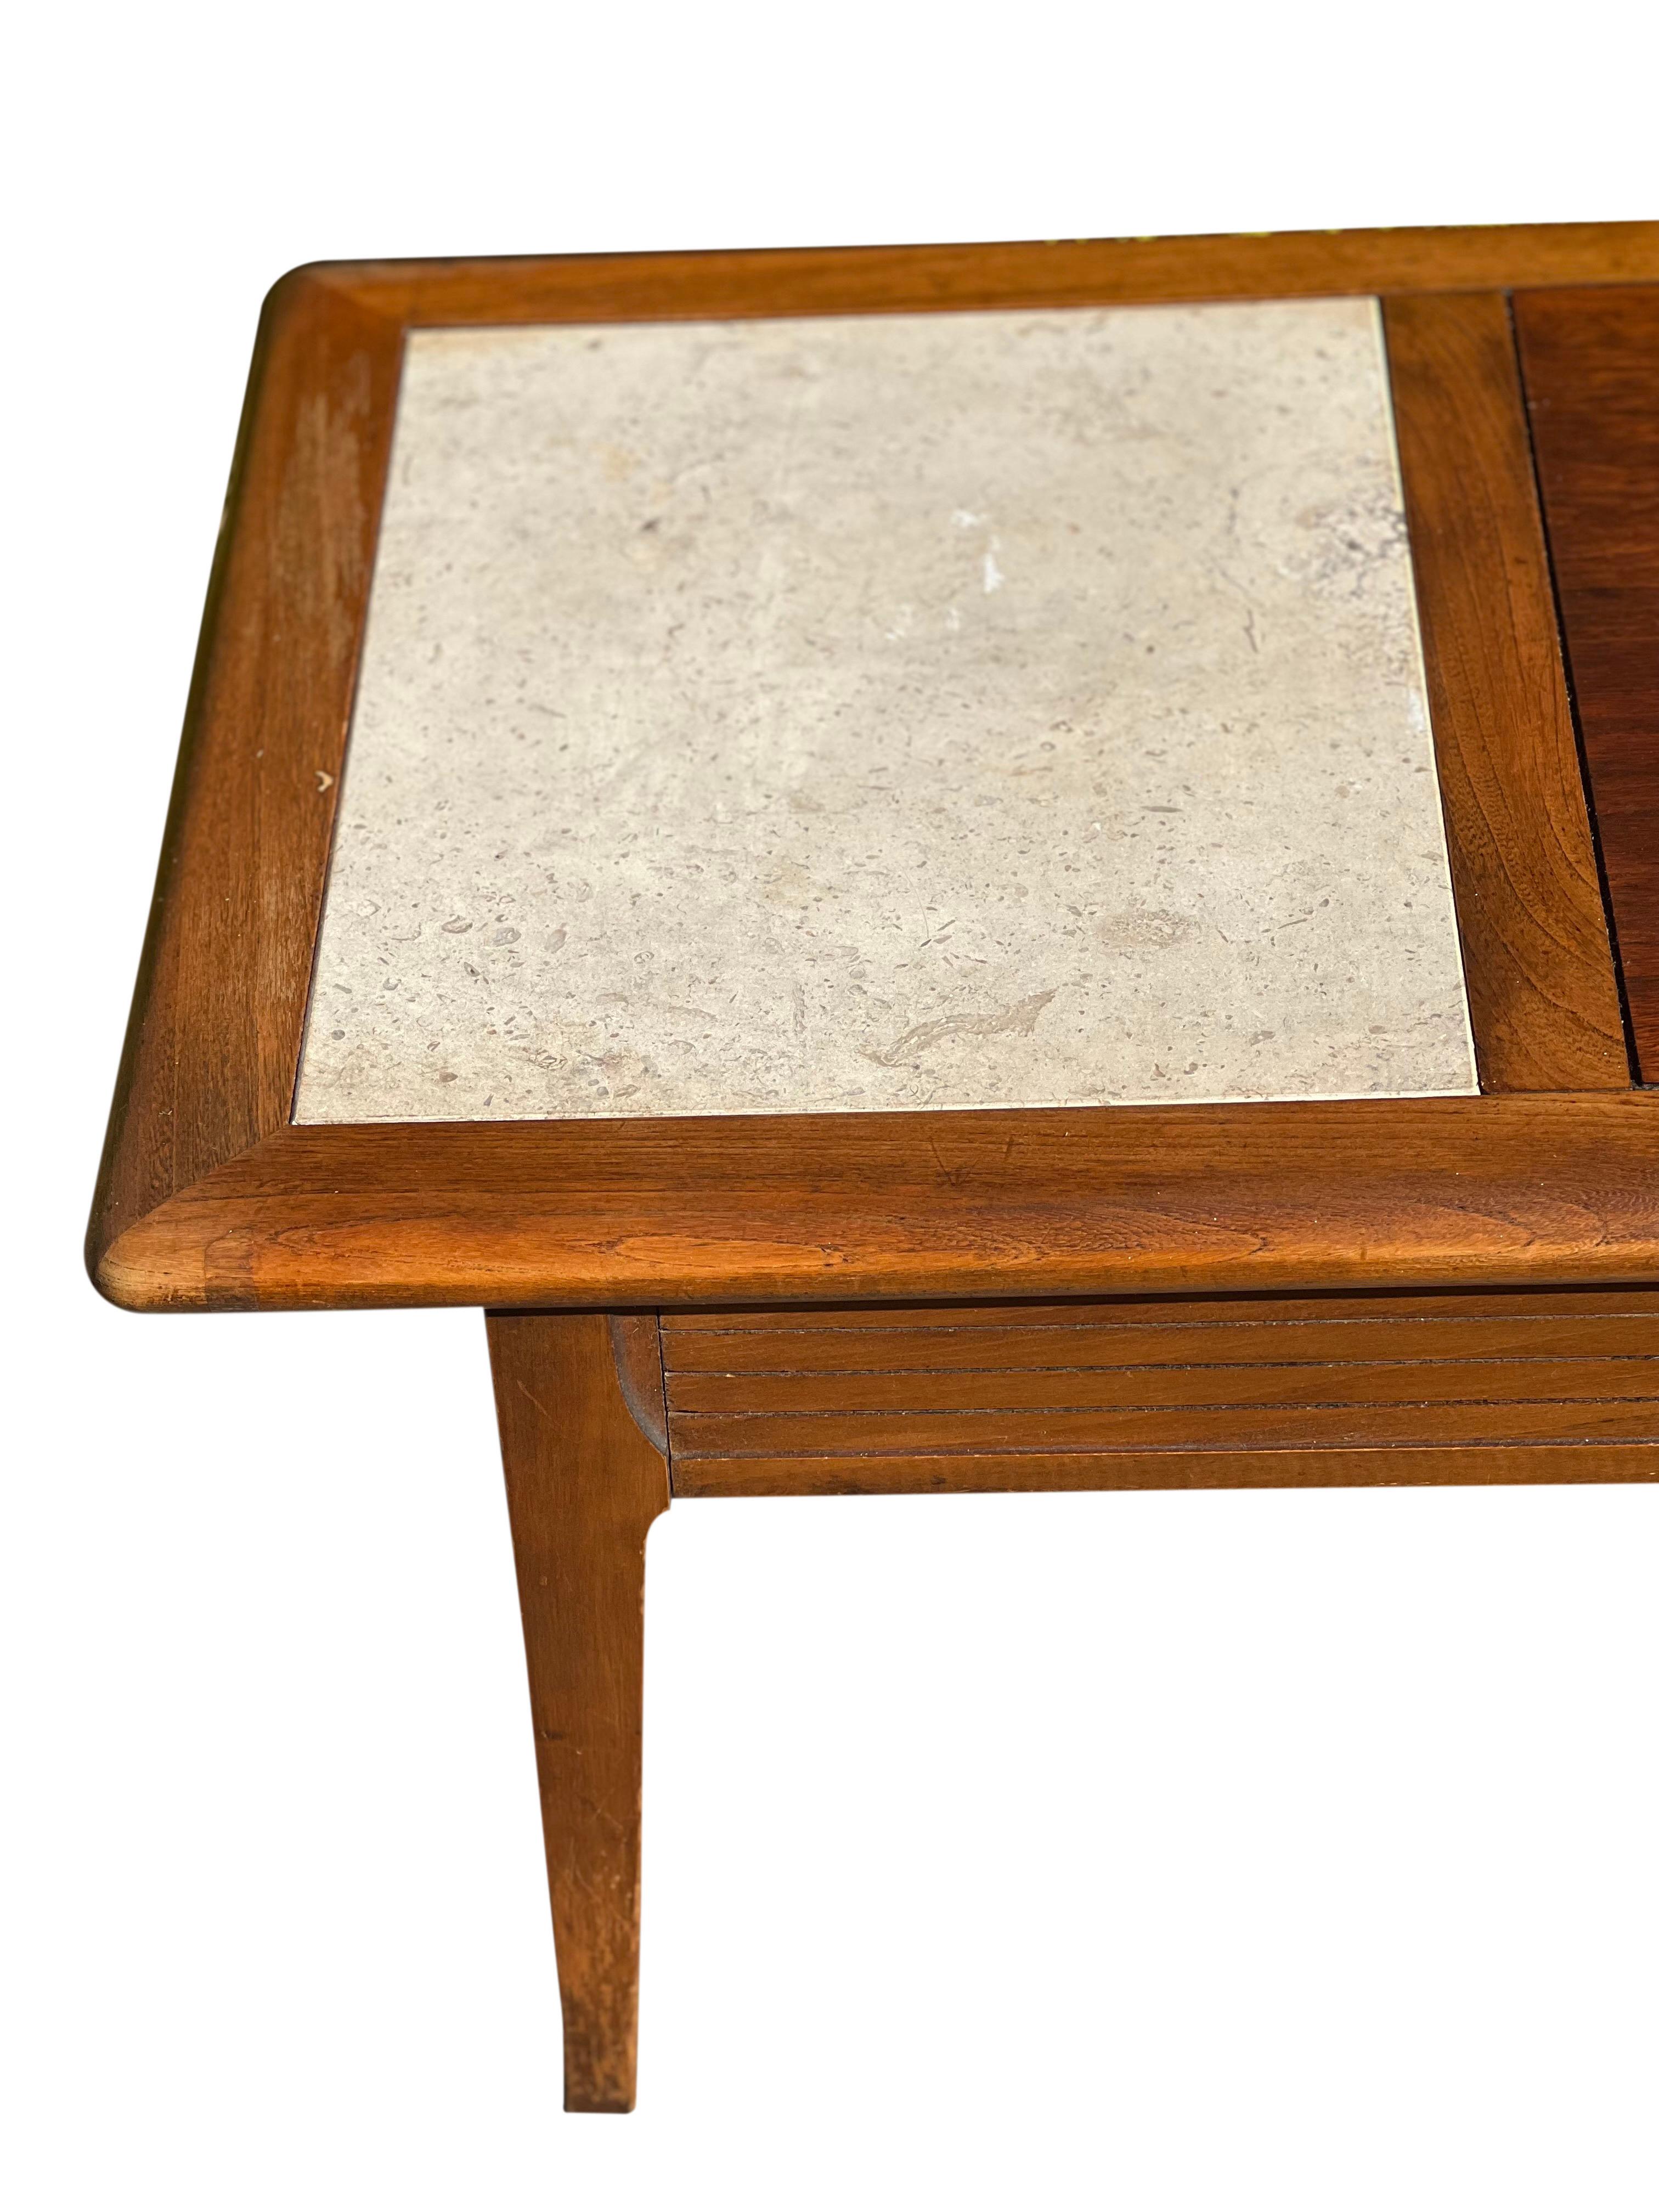 20th Century Mid Century Lane Style Walnut Coffee Table with Travertine Inserts For Sale